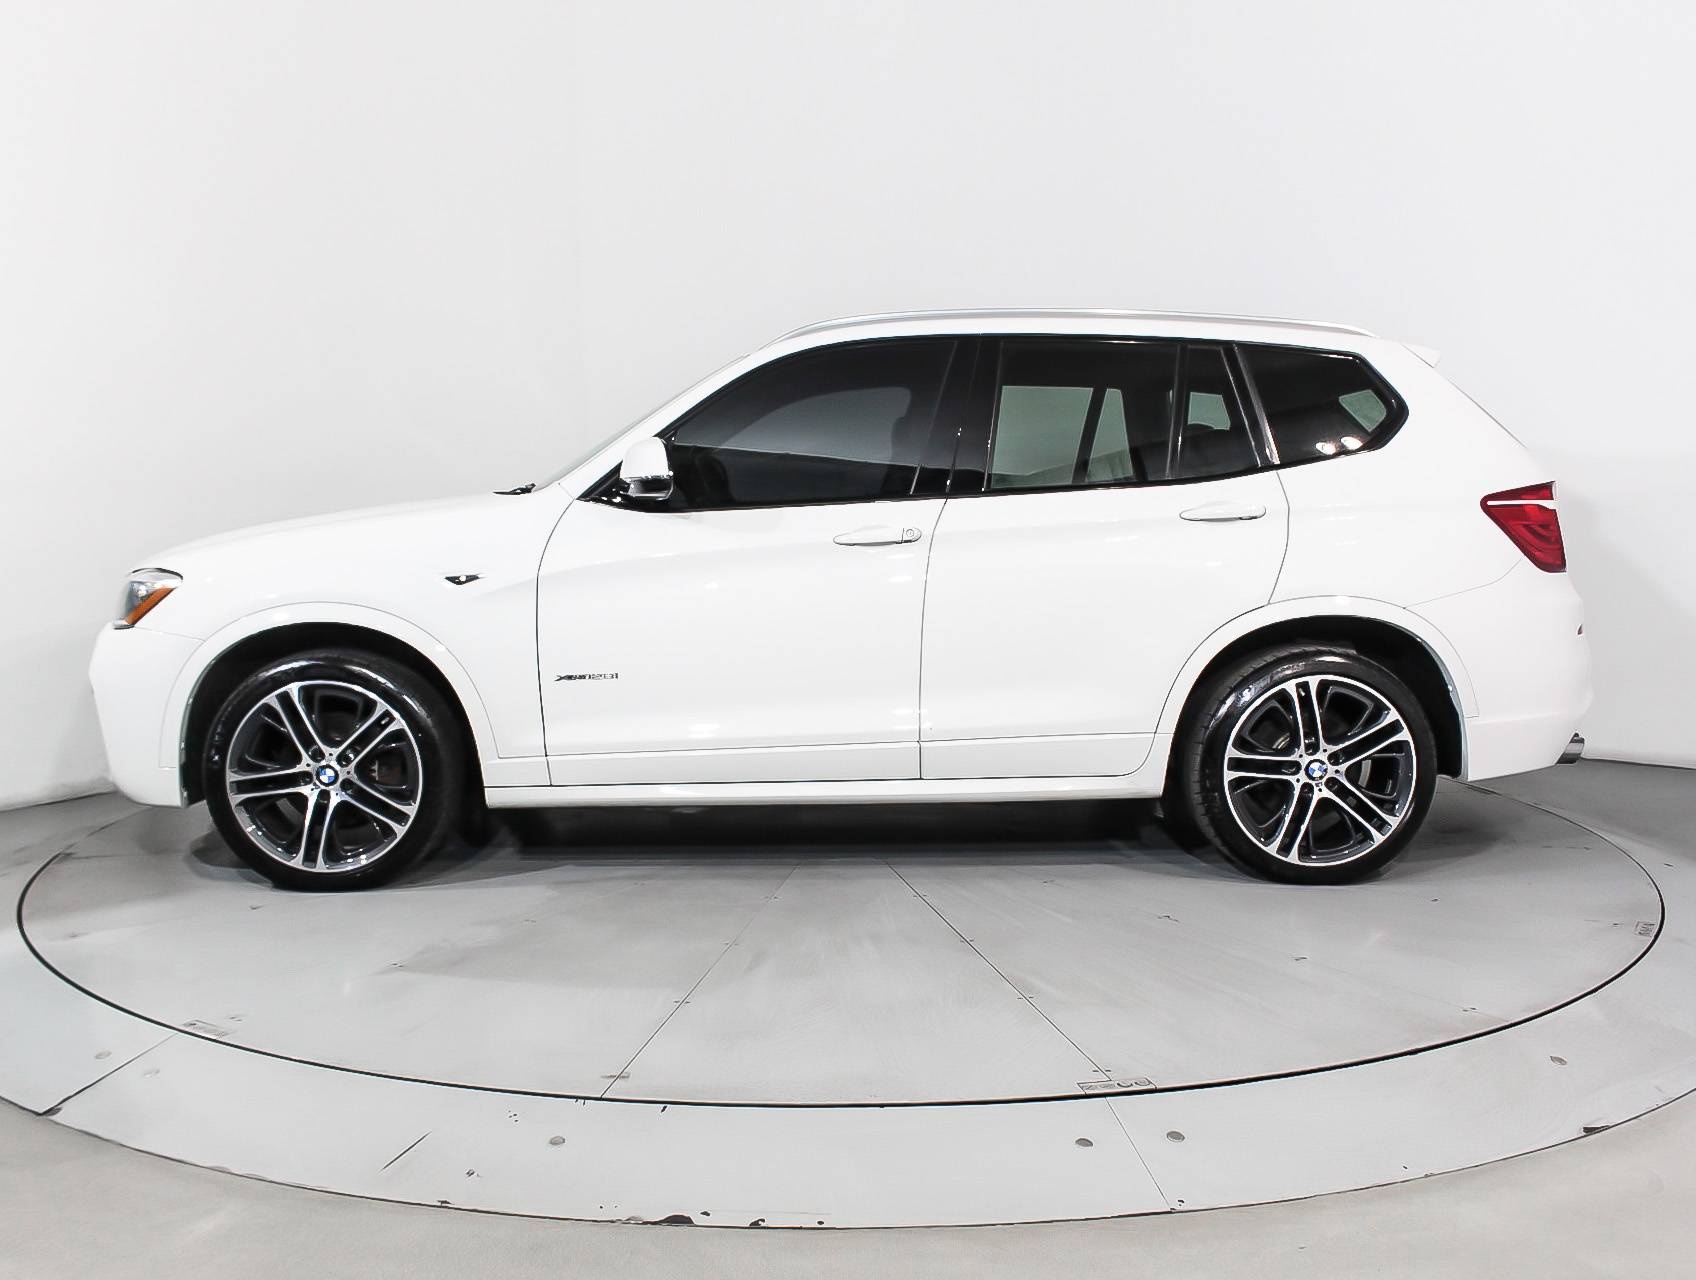 Used 2016 BMW X3 Xdrive28i M Sport for sale in MIAMI | 93863